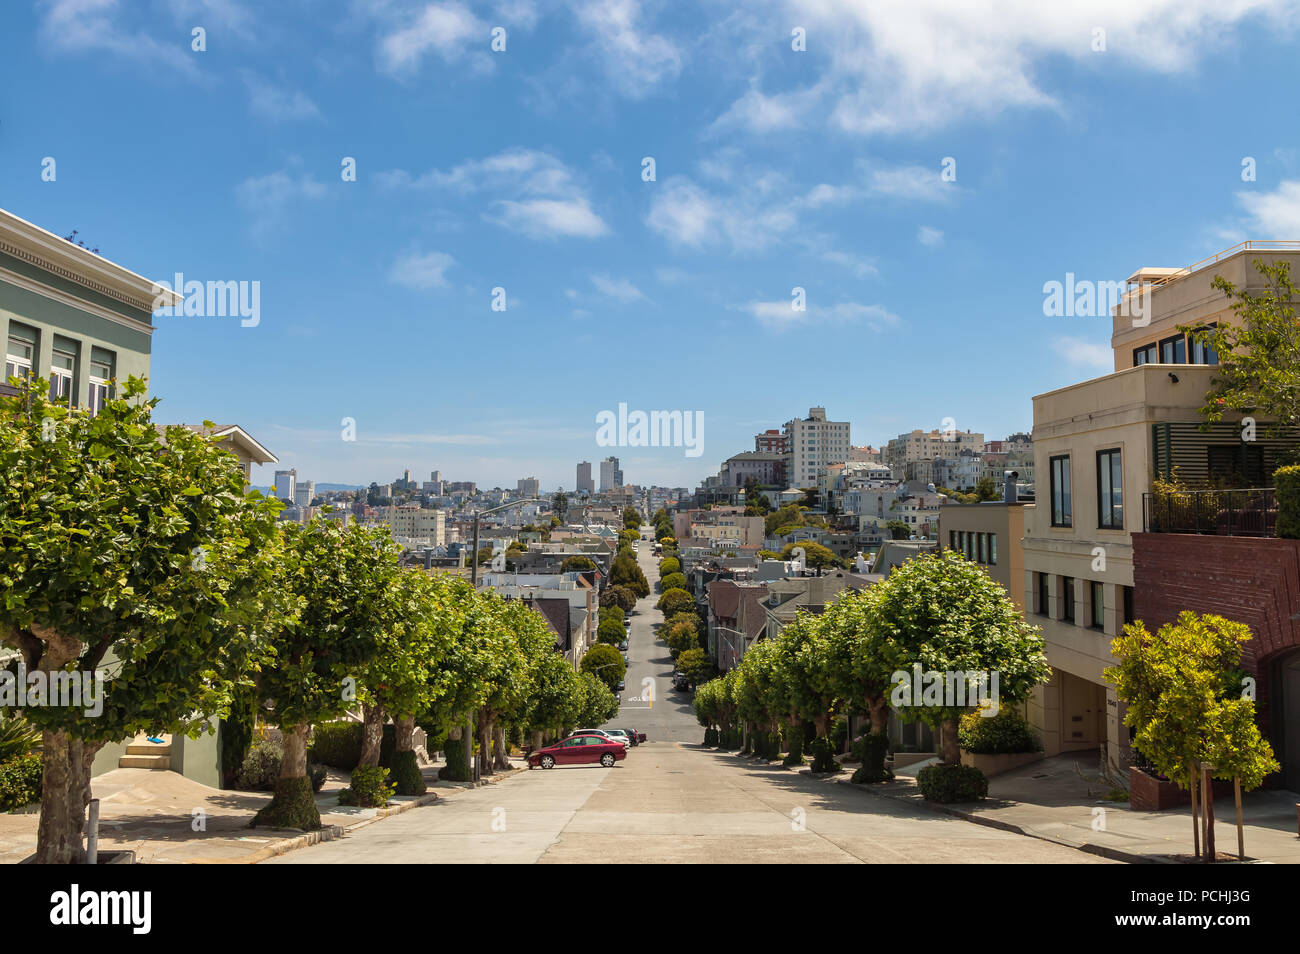 Street view of downtown San Francisco from Pacific Heights, with the London plane trees planted along the street, California, United States. Stock Photo